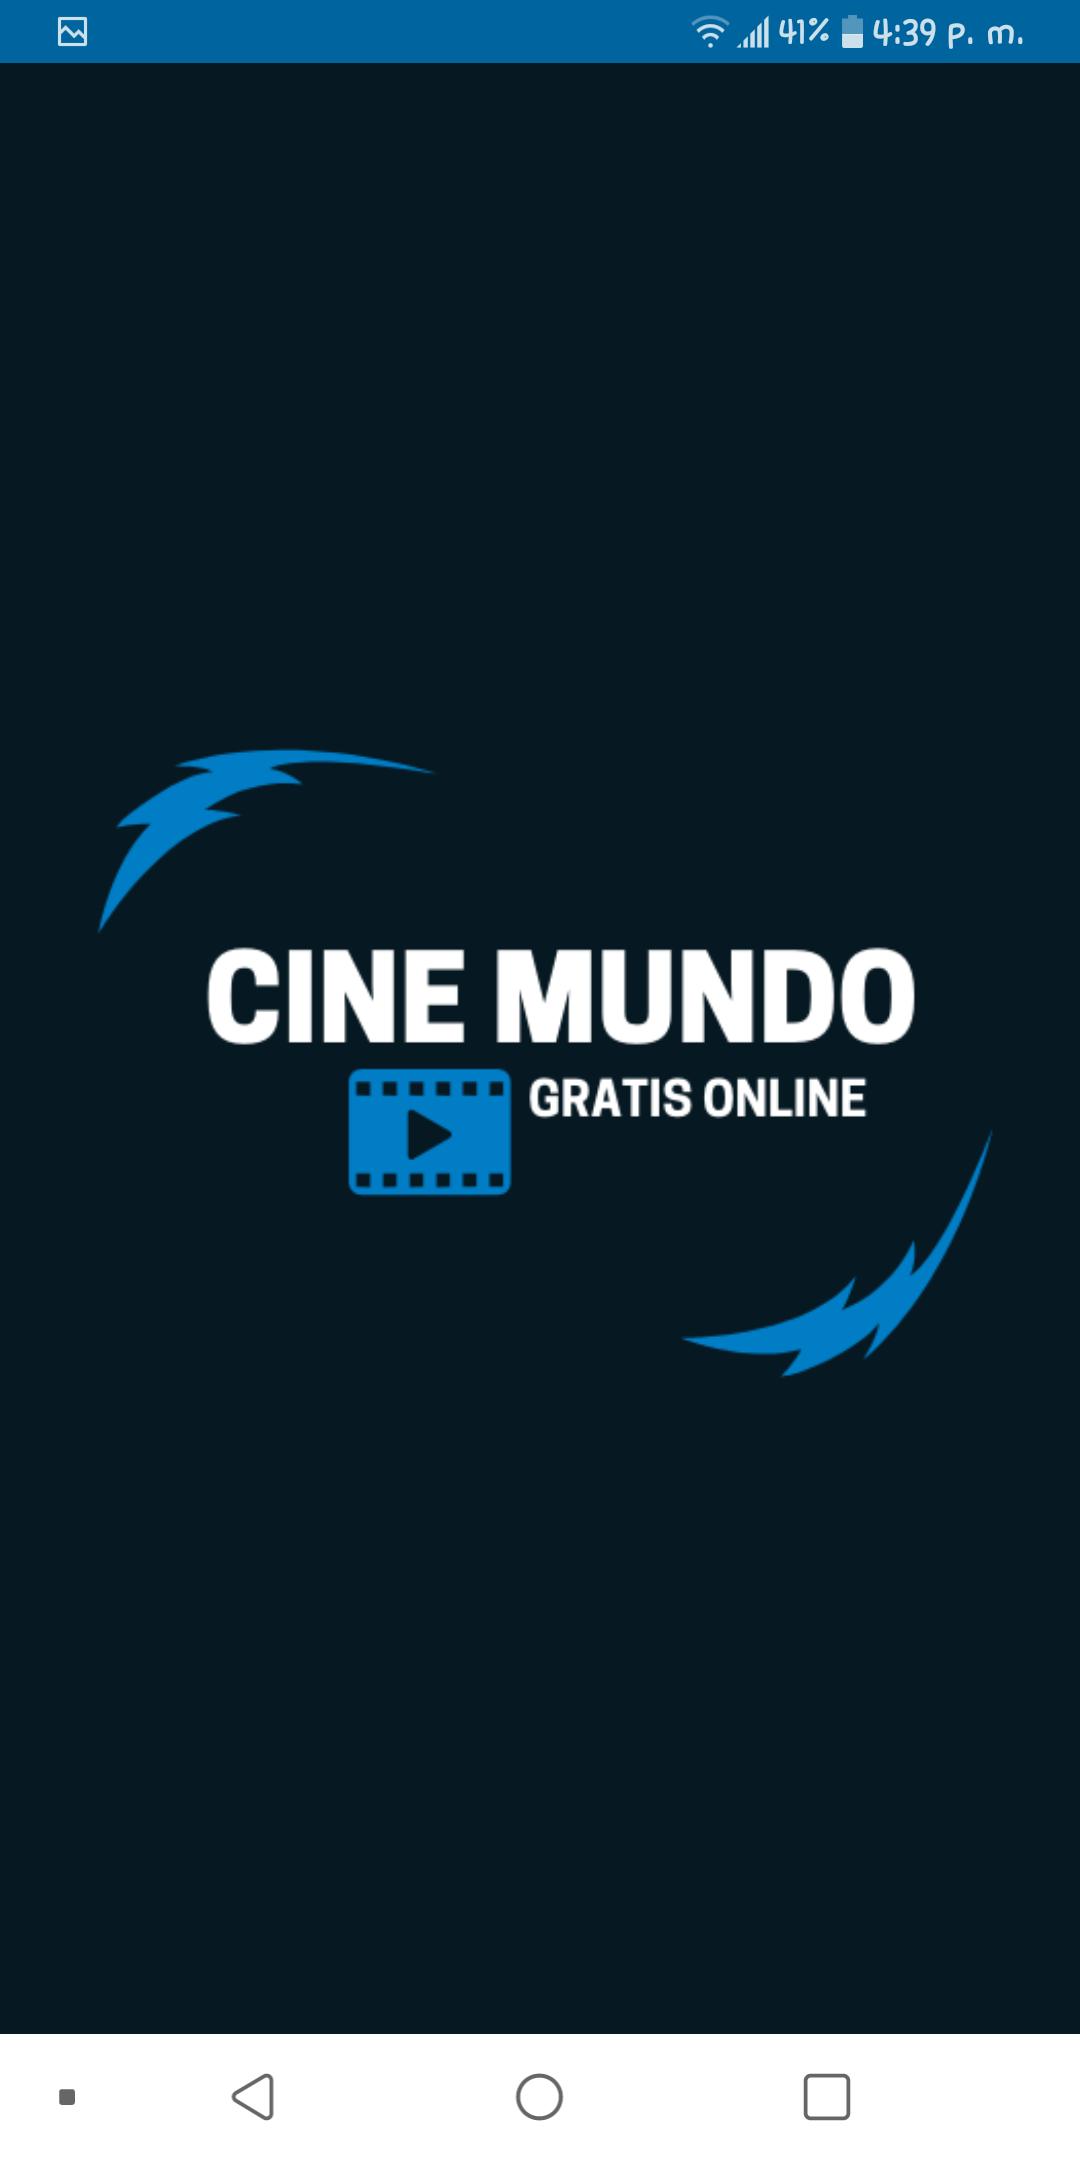 Cine Mundo for Android - APK Download